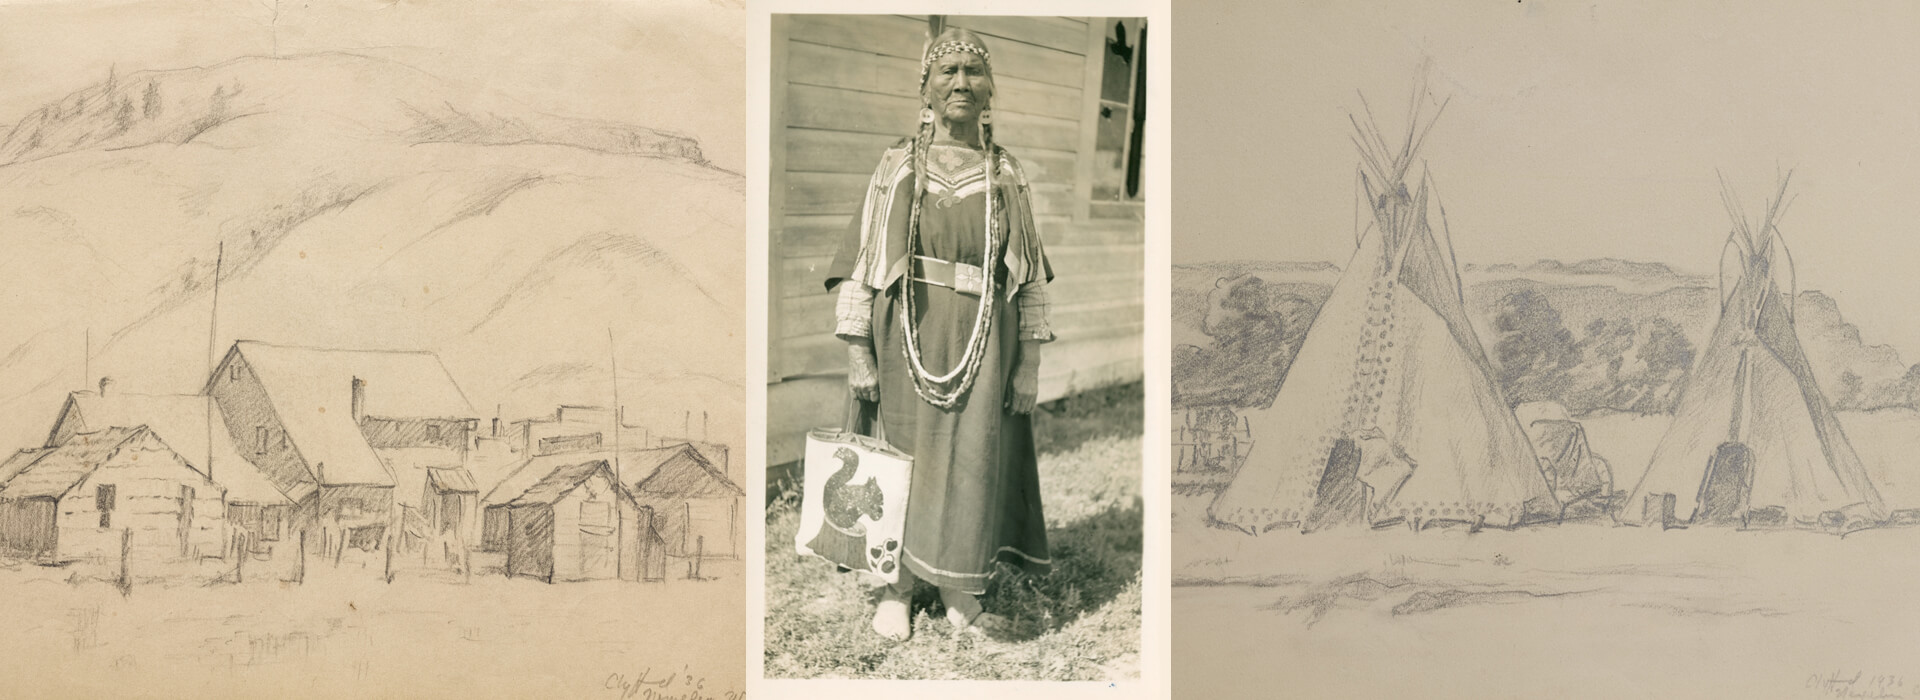 Portrait of a woman in traditional Native American dress, circa 1925 July 9. Photo by Clyfford Still. Courtesy the Clyfford Still Archives. © City and County of Denver / ARS, NY